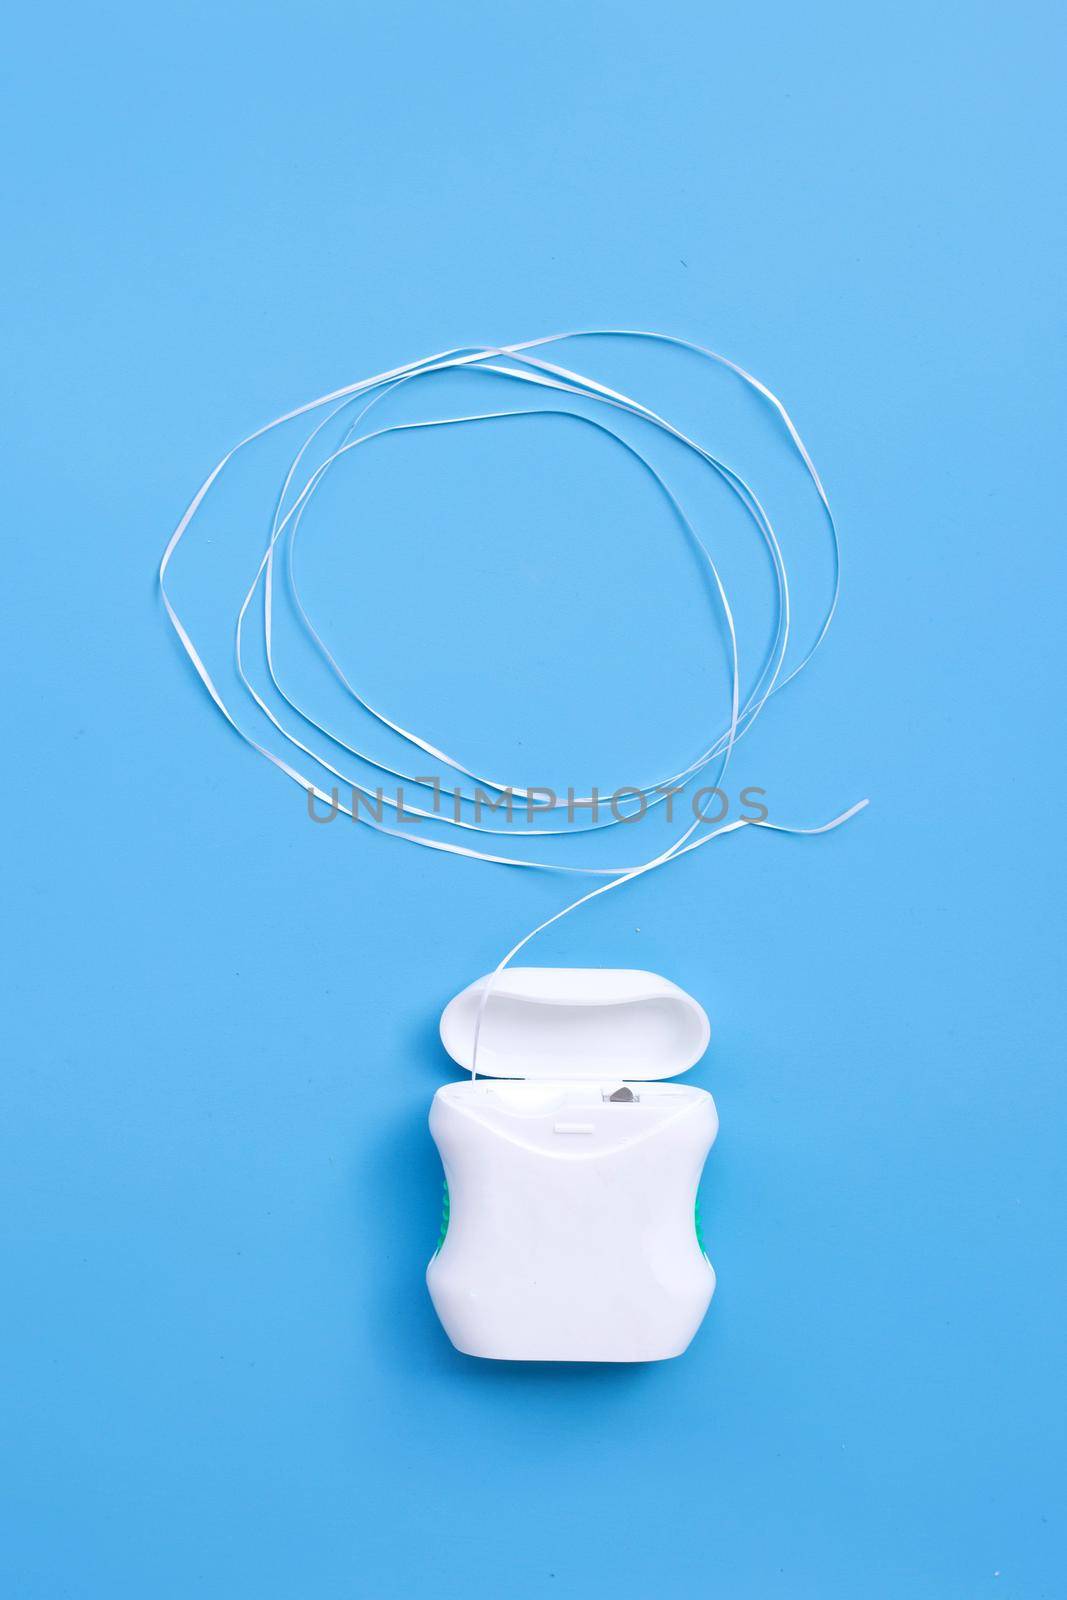 Dental floss on blue background. Copy space by Bowonpat